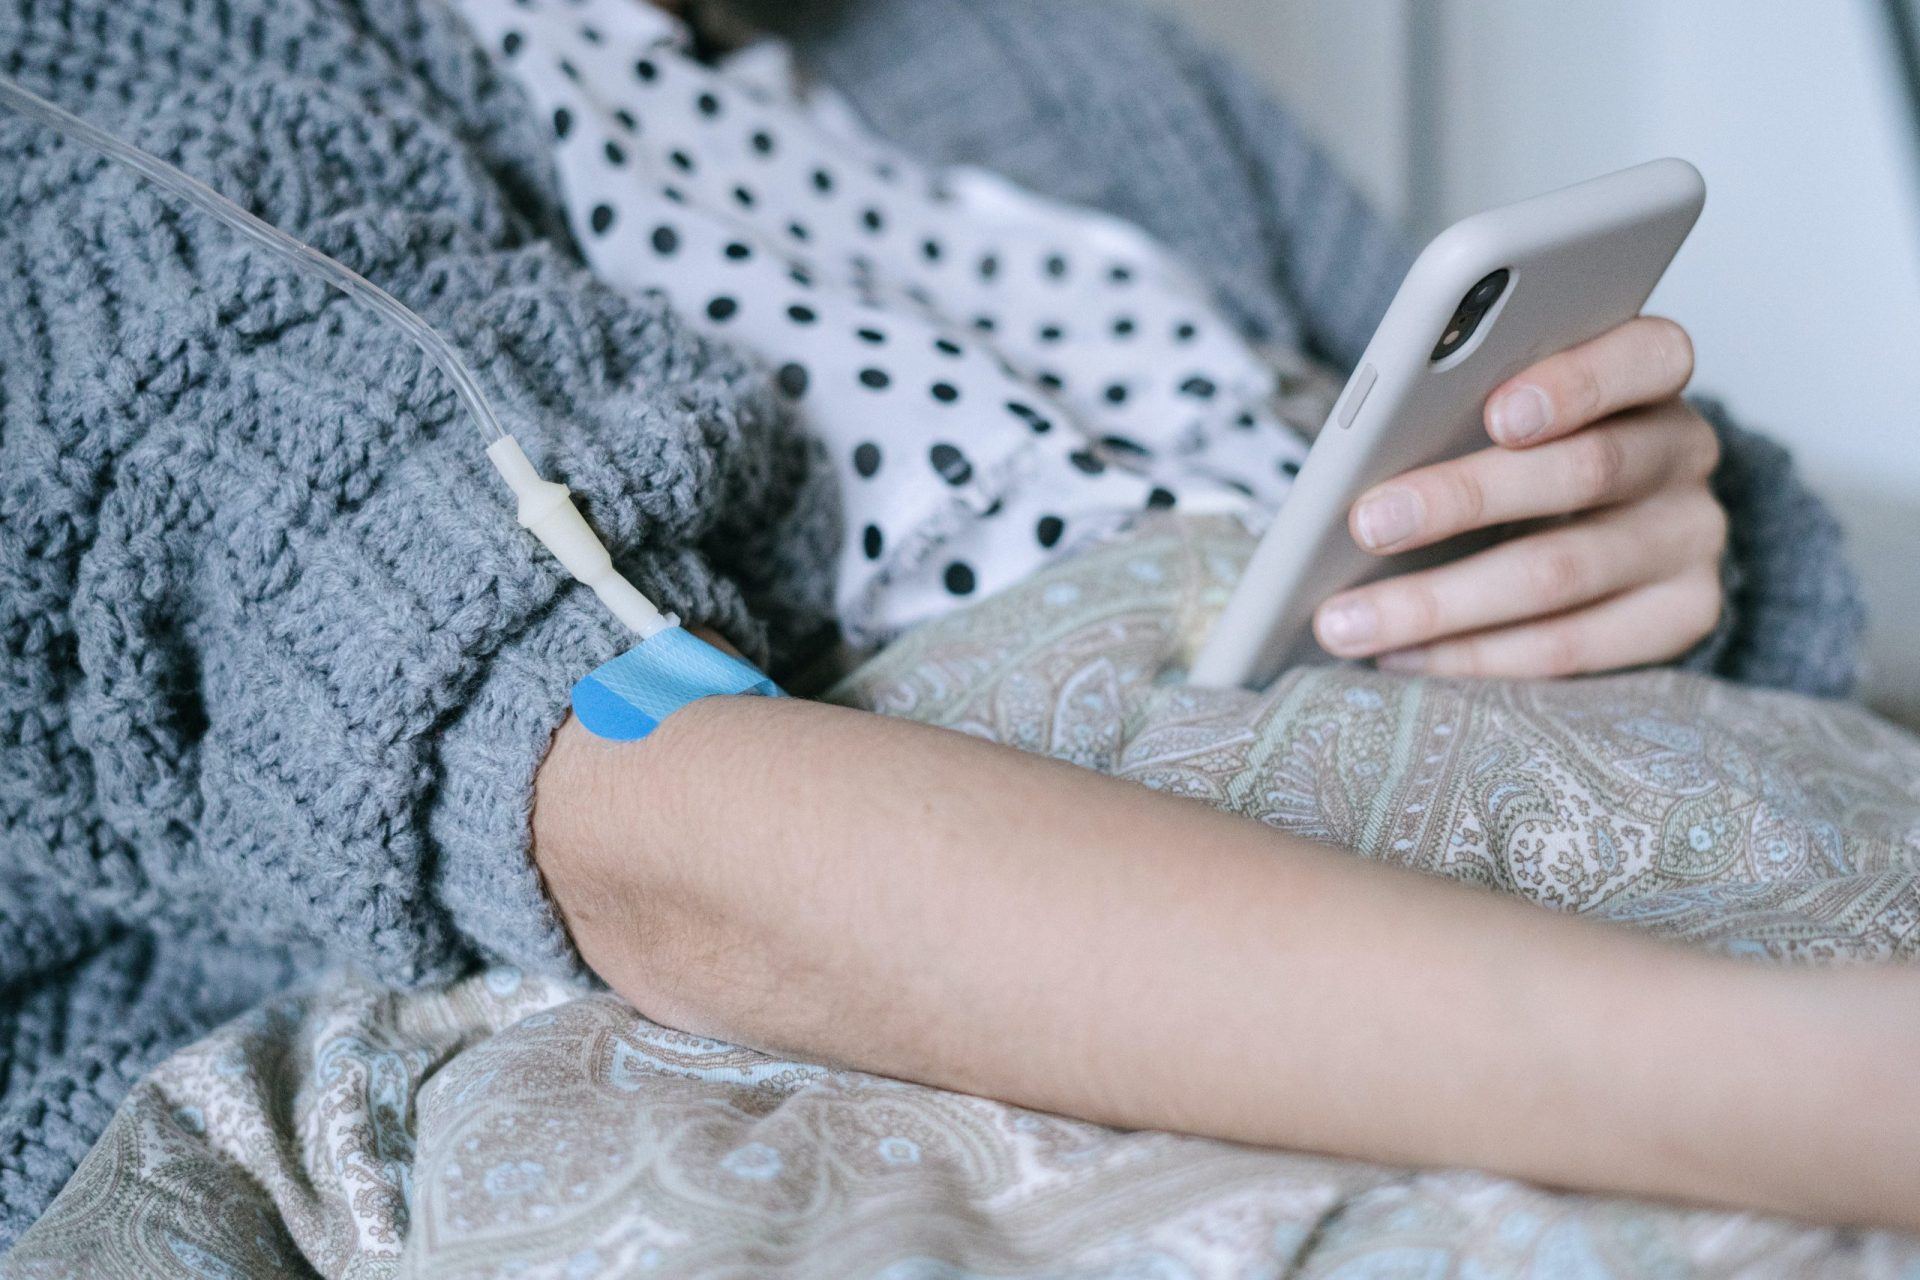 5 Benefits to Using Mobile IV Therapy at Home